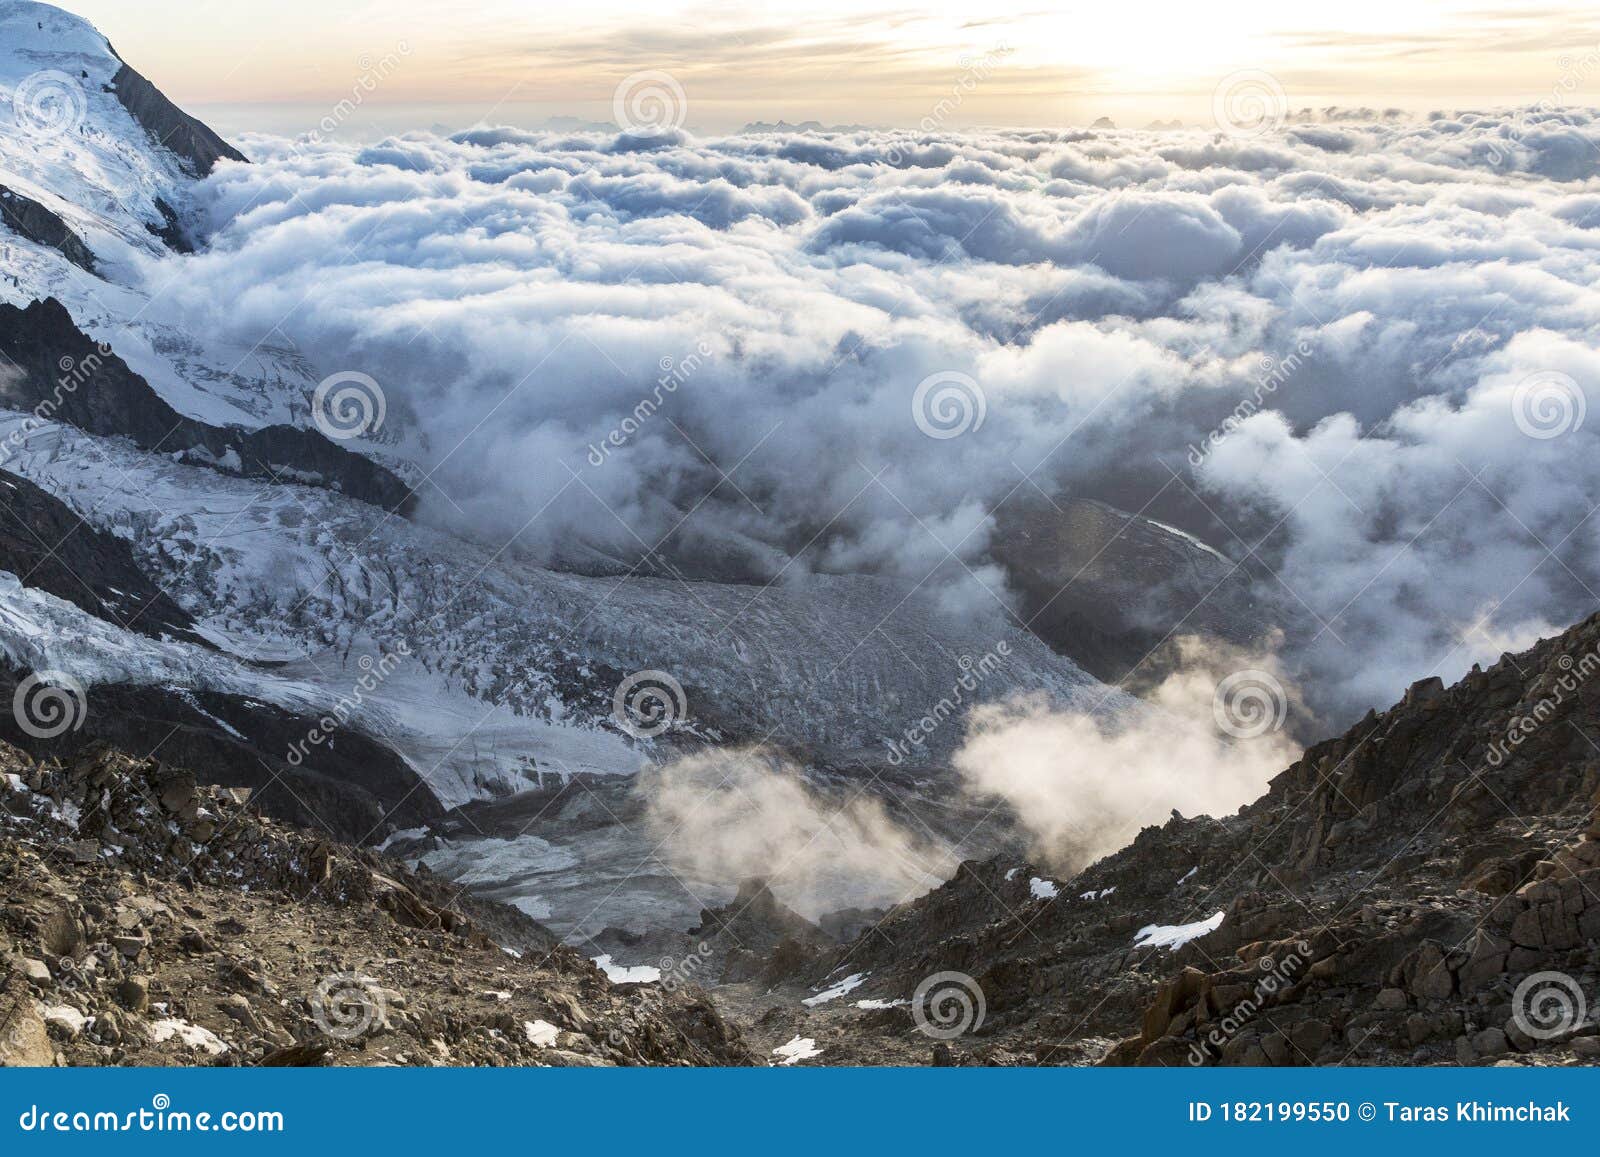 dramatic sunset sky over the rogues alps. view from the cosmique refuge, chamonix, france.